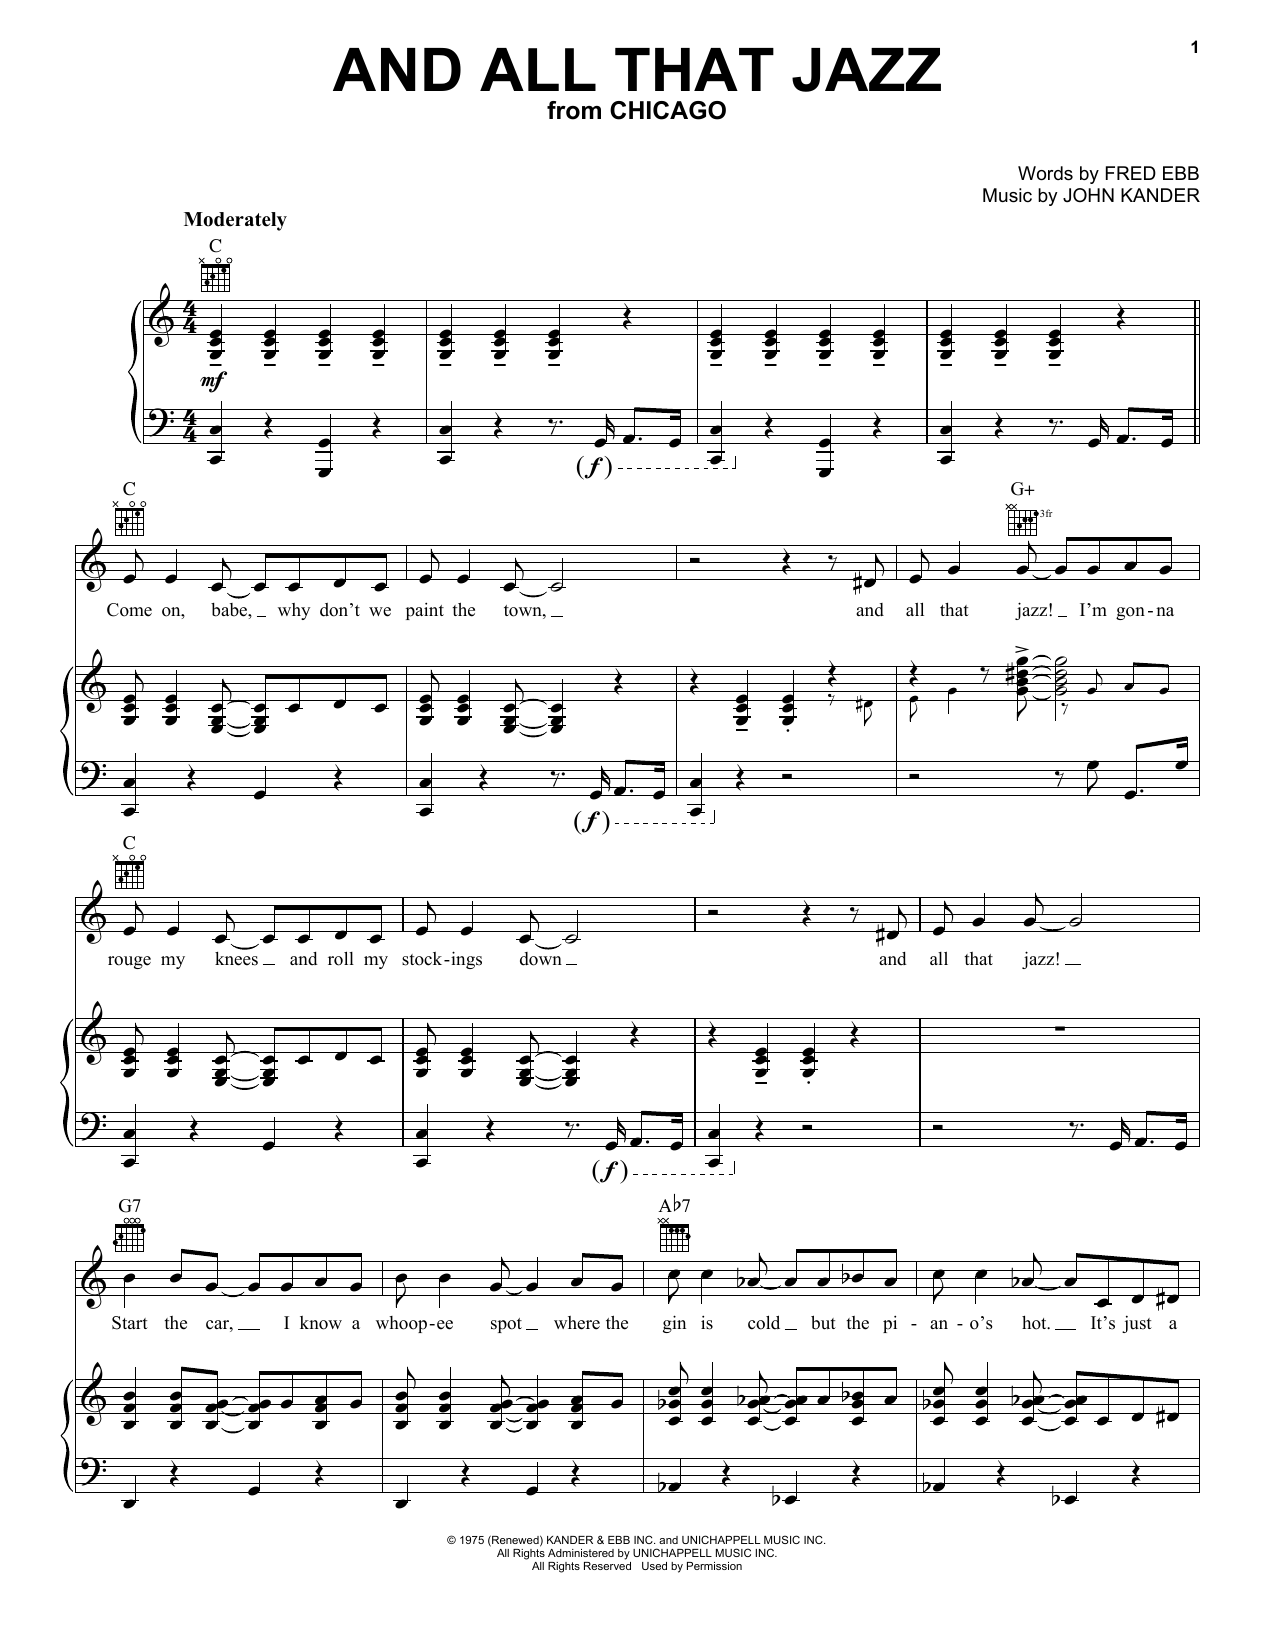 Download Kander & Ebb And All That Jazz Sheet Music